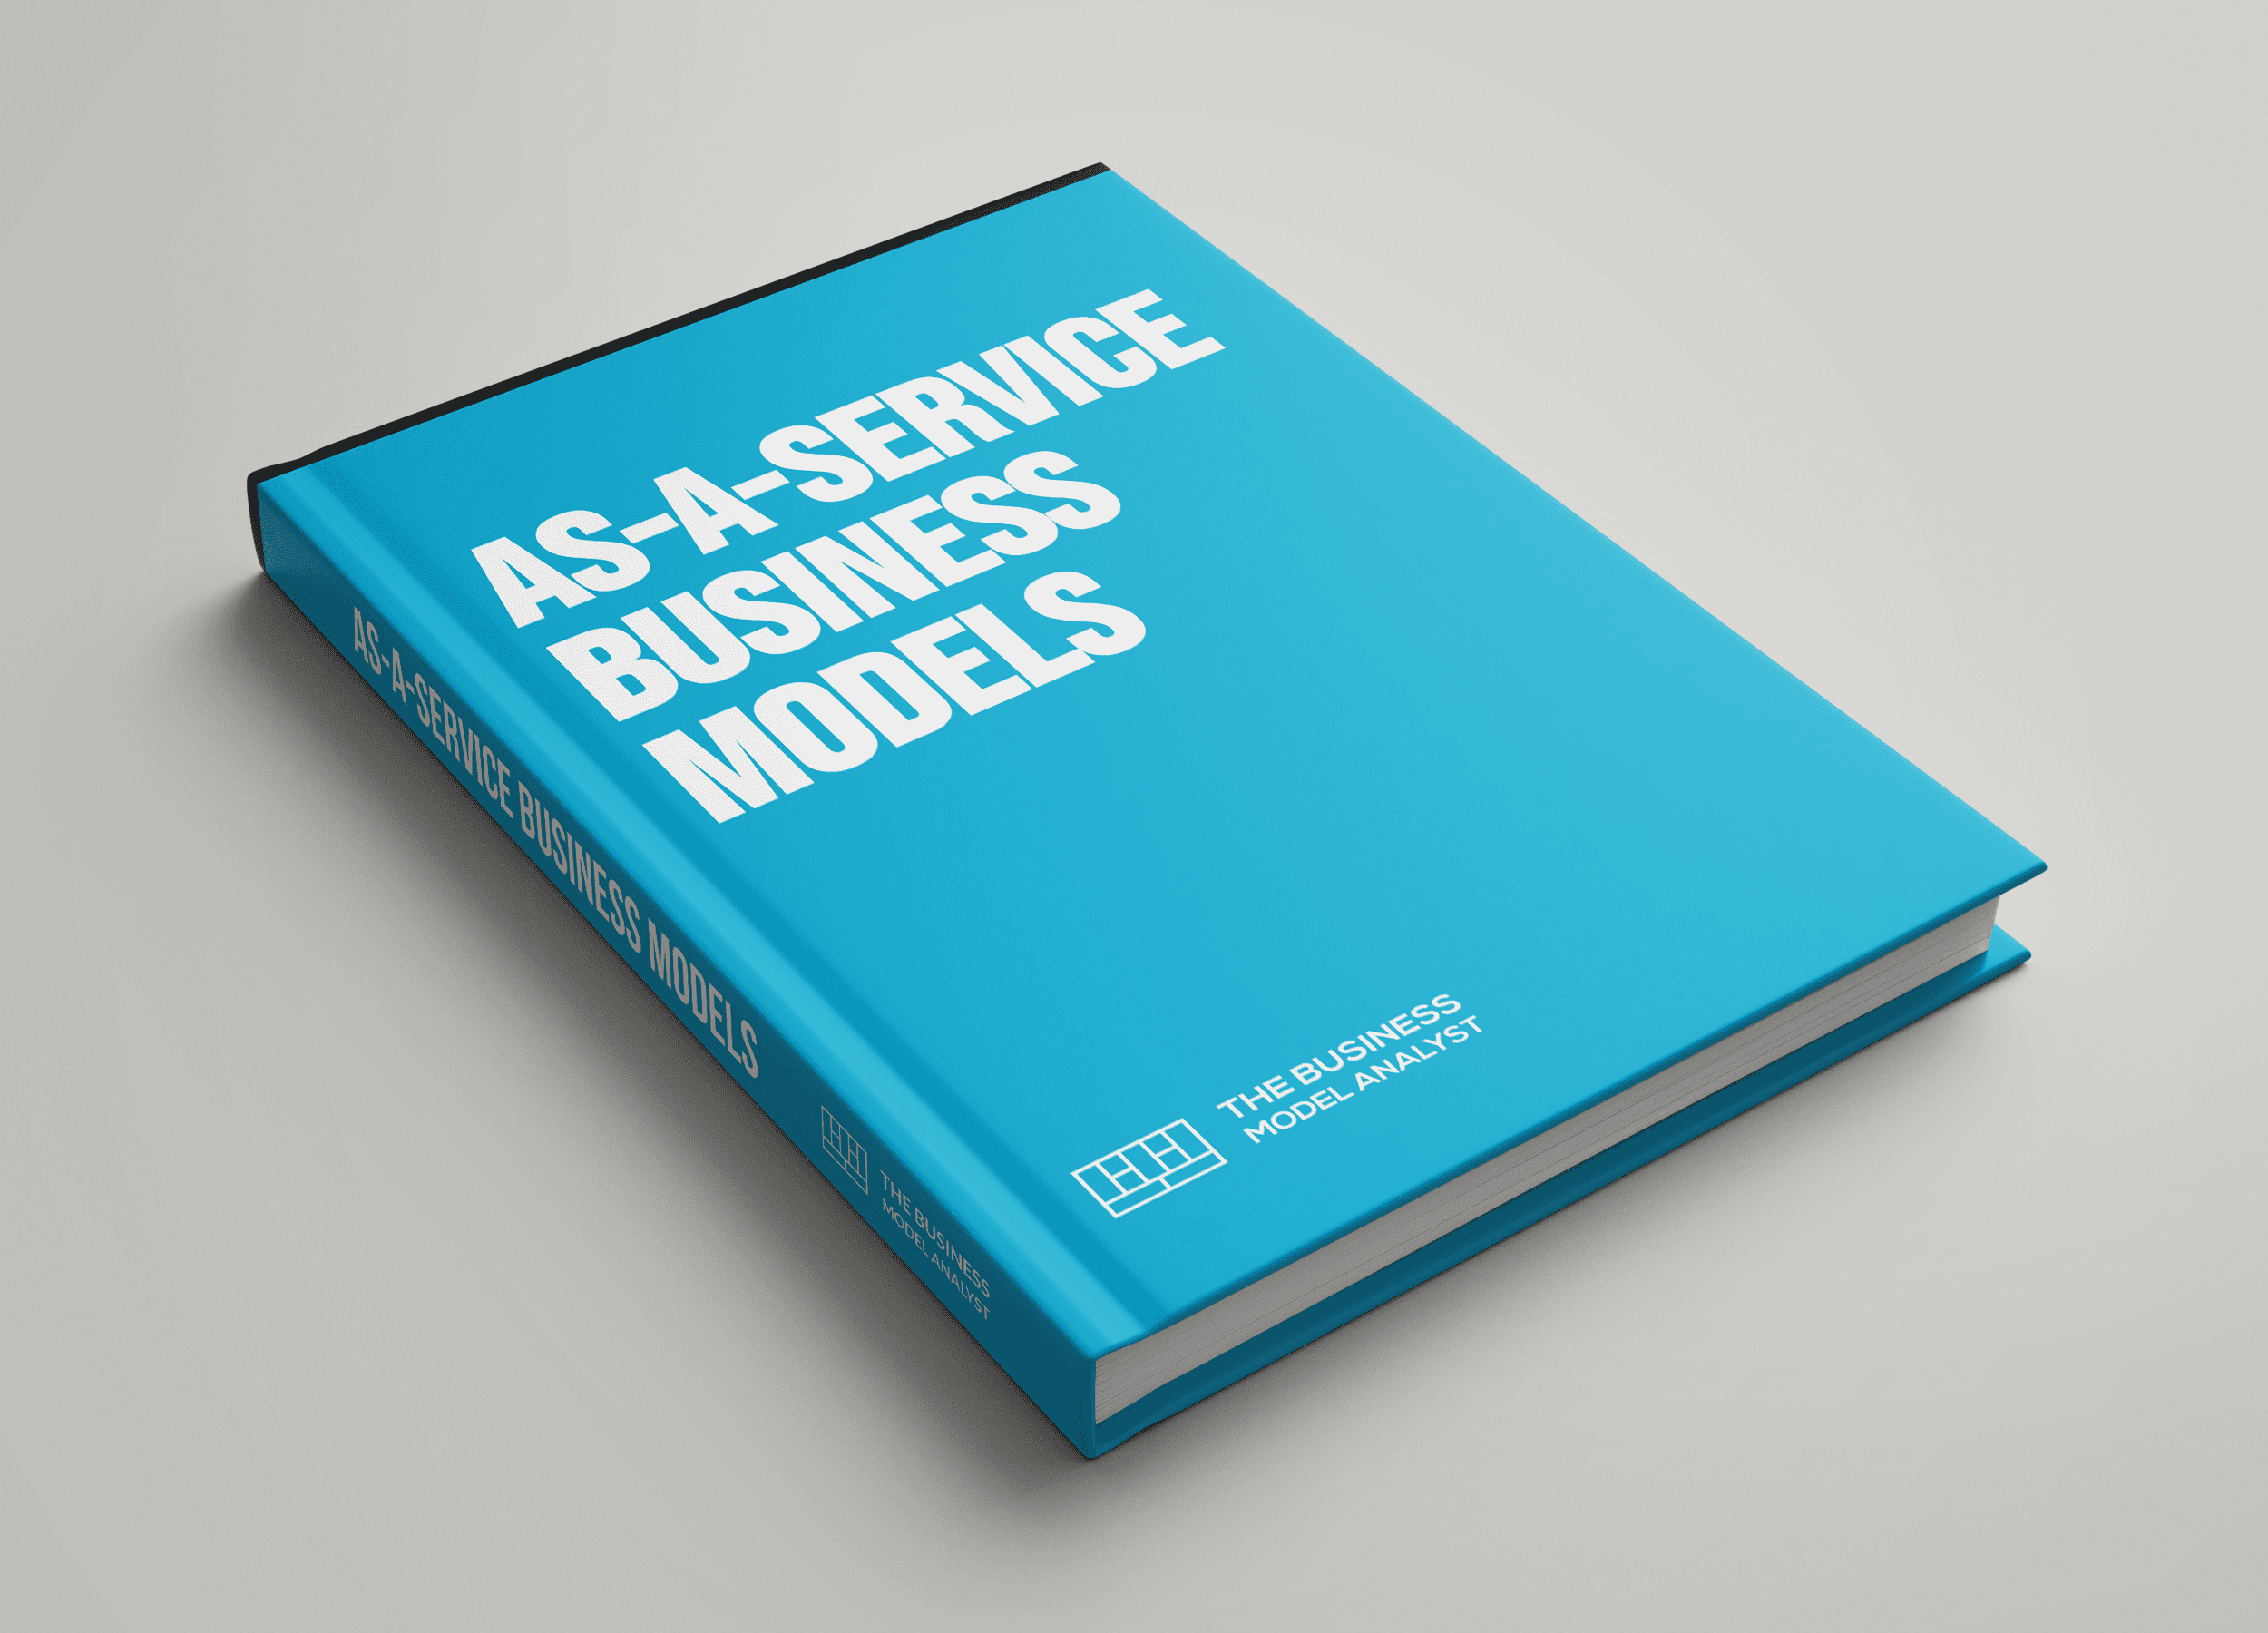 Coverage of business models as a service